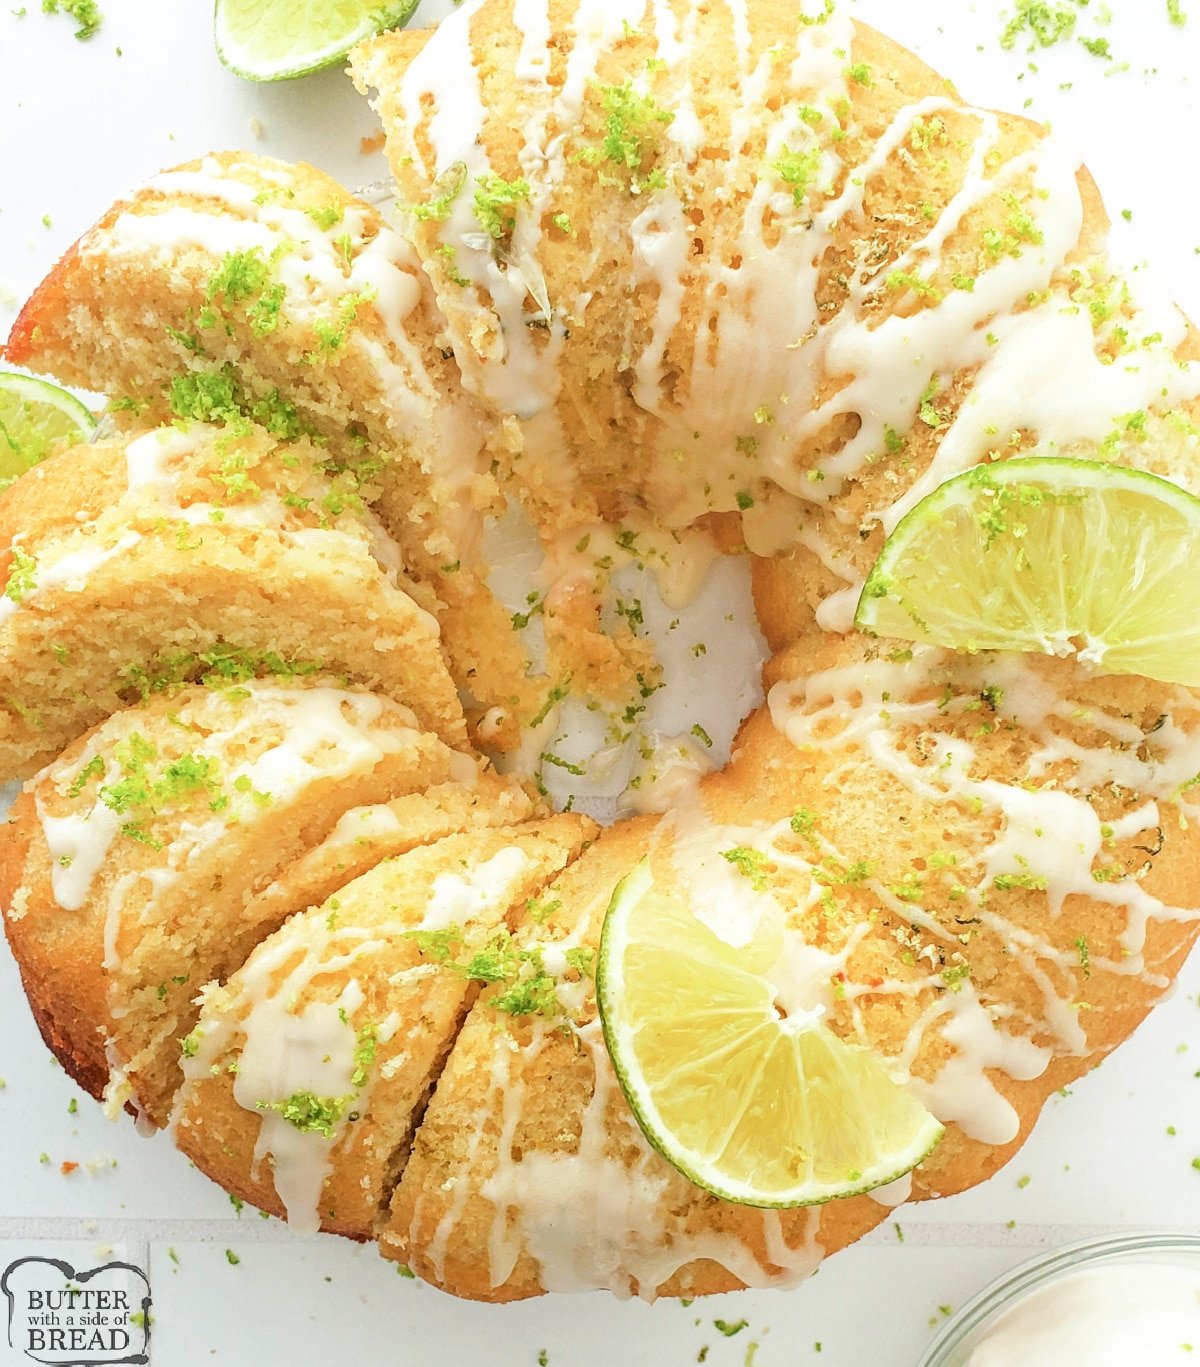 Key Lime Bundt Cake made with sour cream, lime zest and buttermilk. Delicious key lime bundt cake recipe with a simple powdered sugar glaze. 